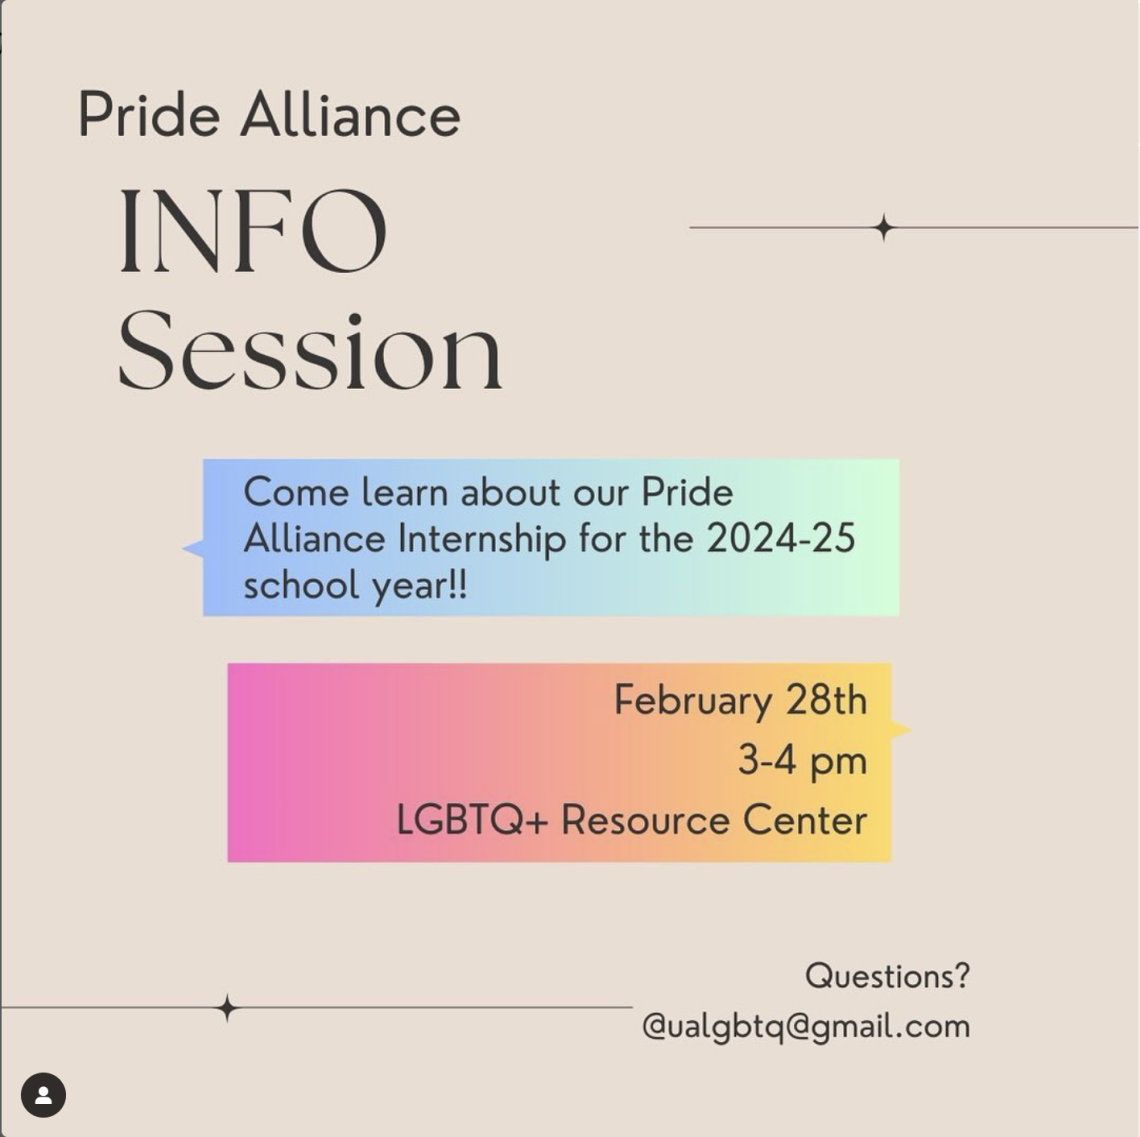 [ID: A tan flyer reads “PRIDE ALLIANCE INFO SESSION” in black letters in the top left corner. Underneath, text inside a blue-green box reads “Come learn about our Pride Alliance Internship for the 2024-25 school year!!” Underneath, text inside a pink-yellow box reads “February 28th, 3-4pm, LGBTQ+ Resource Center.” Small text at the bottom right corner of the flyer reads “Questions? ualgbtq@gmail.com”]